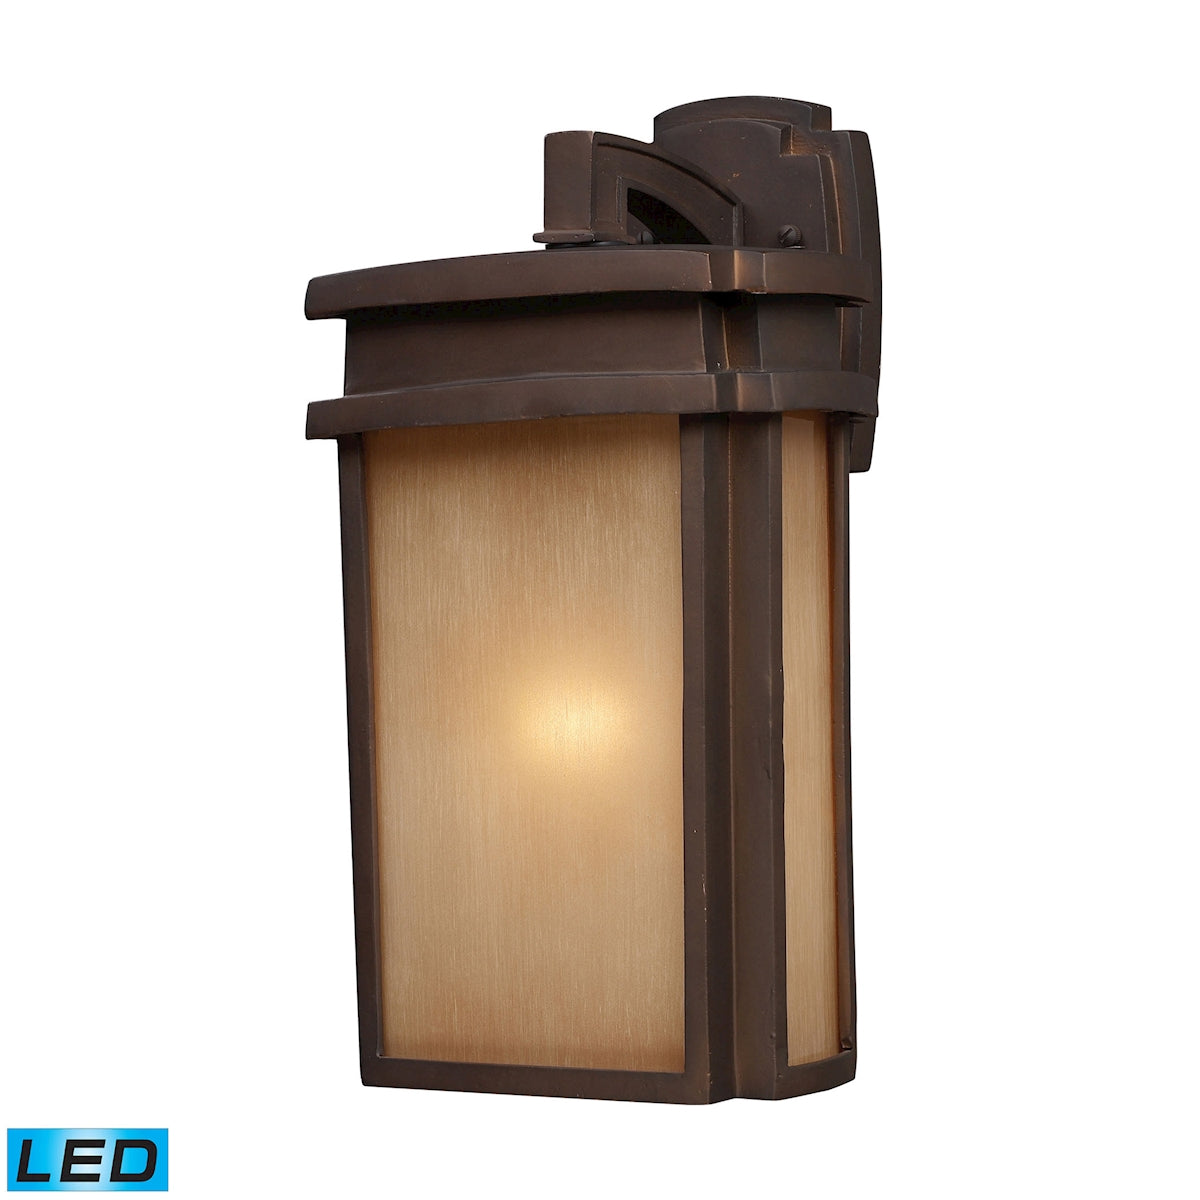 ELK Lighting 42141/1-LED Sedona 1-Light Outdoor Wall Lamp in Clay Bronze - Includes LED Bulb